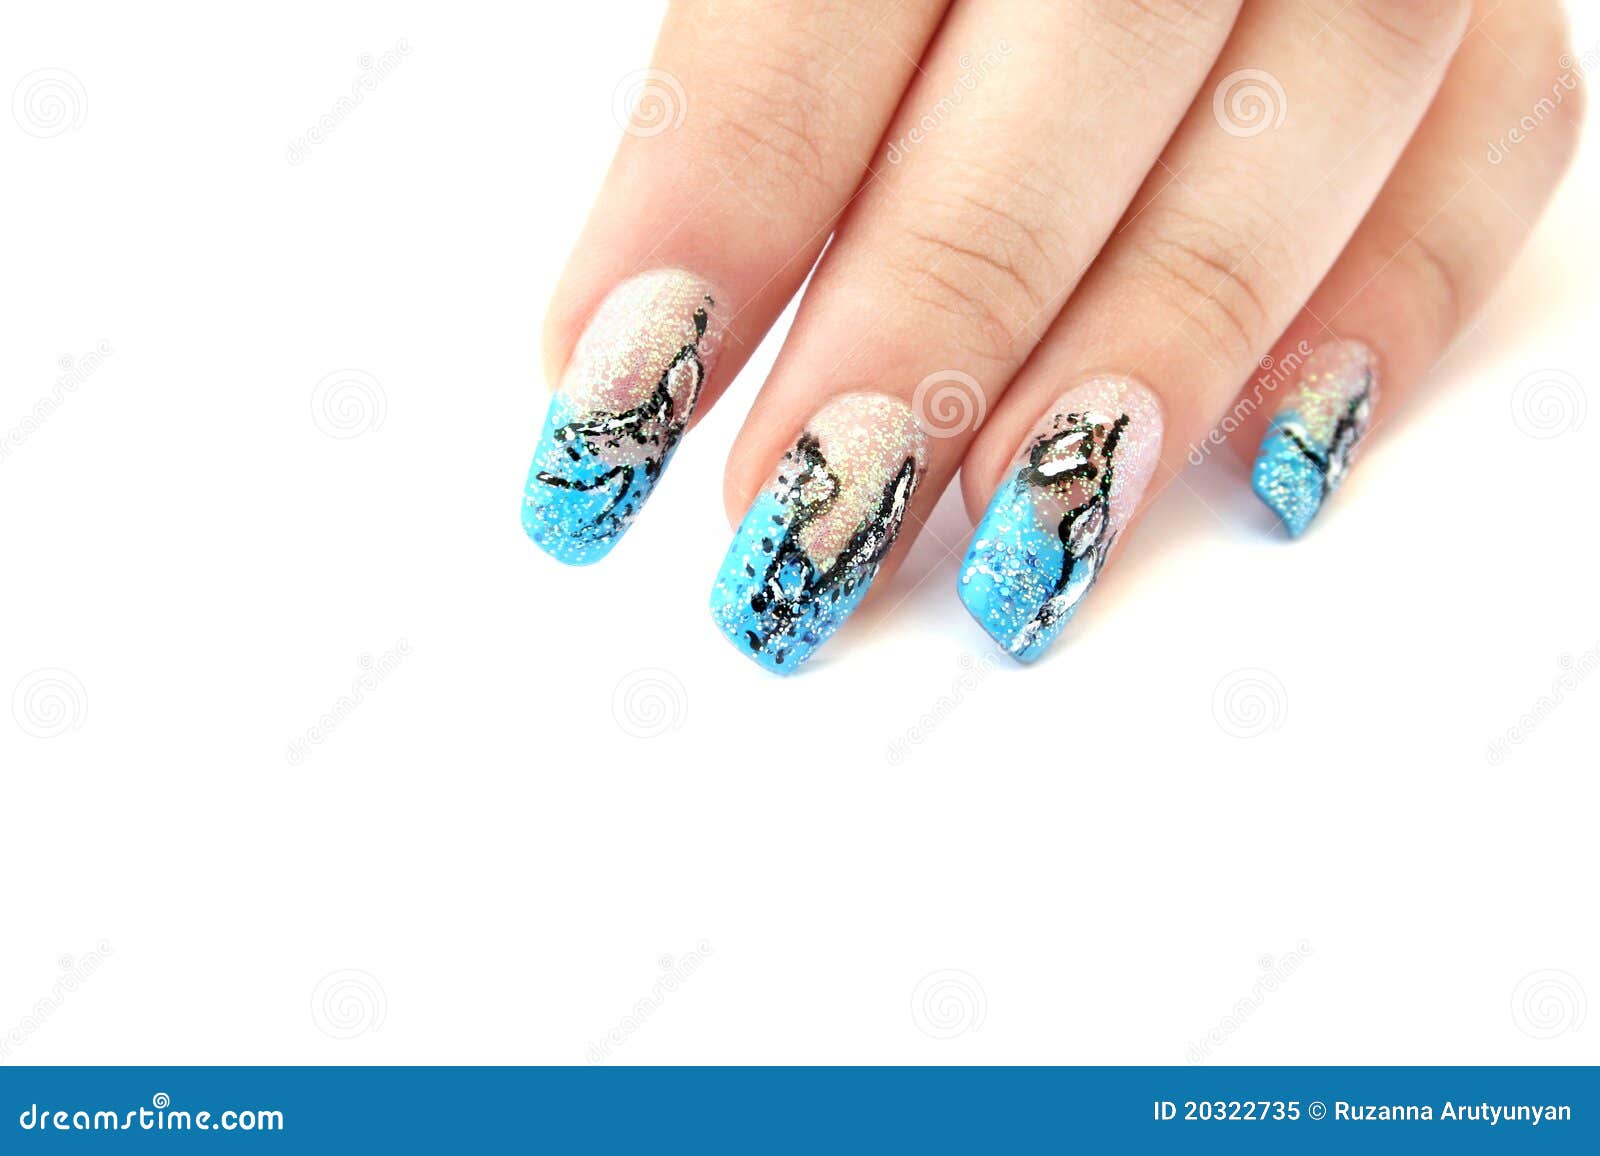 Hand With Nail Art Stock Image Image Of Manicure Artwork 20322735